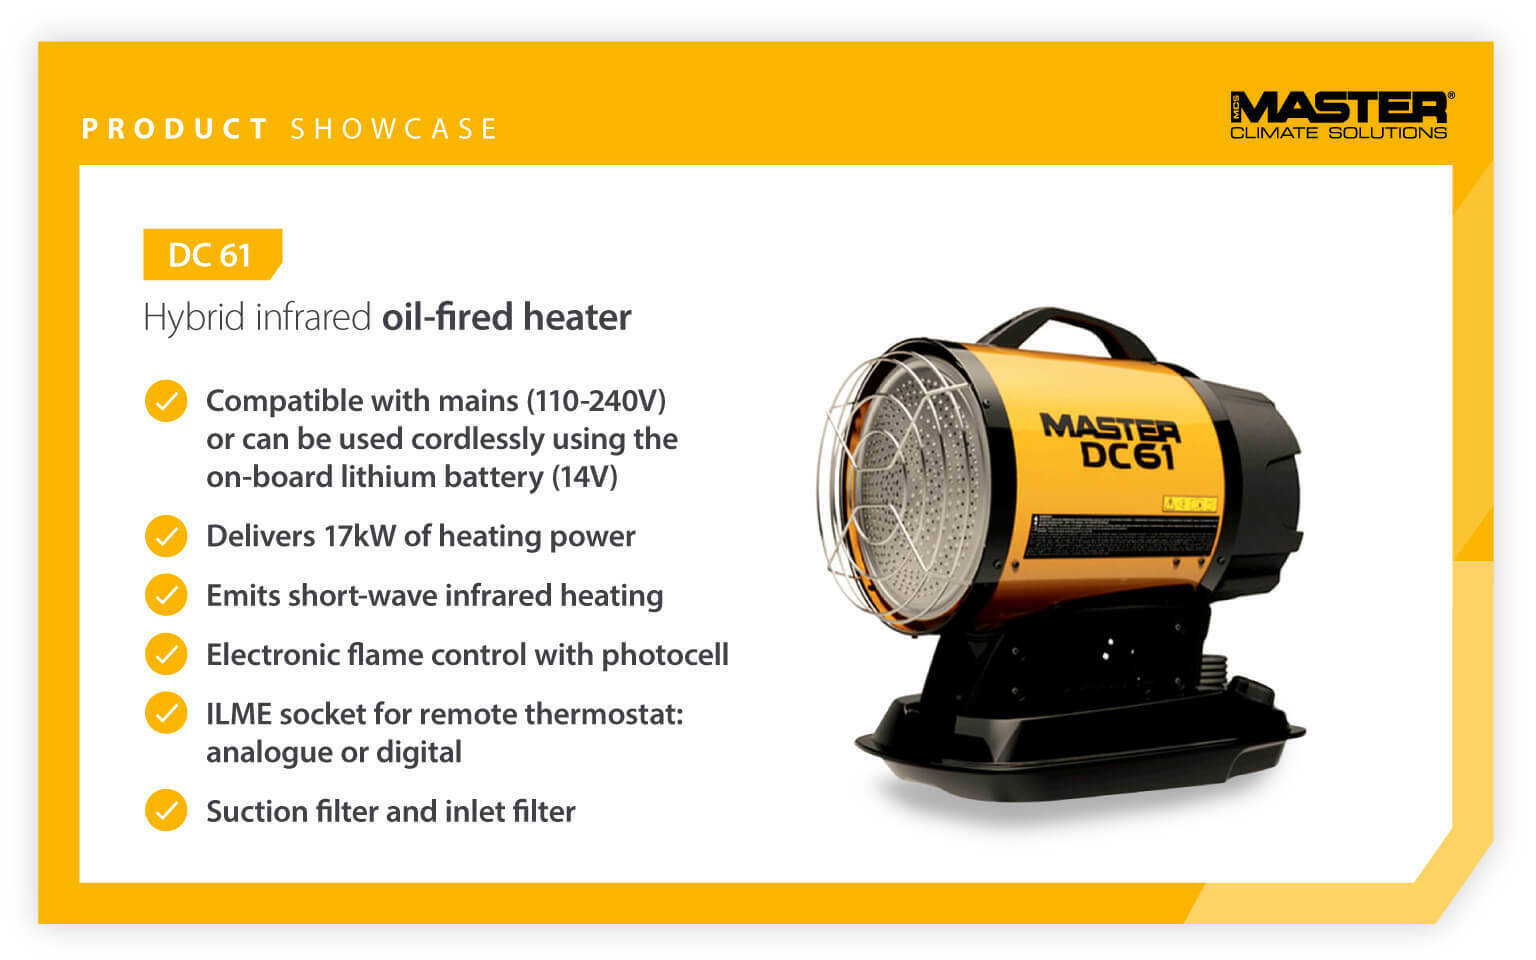 Product showcase of Master DC61 infrared heater features - Infographic